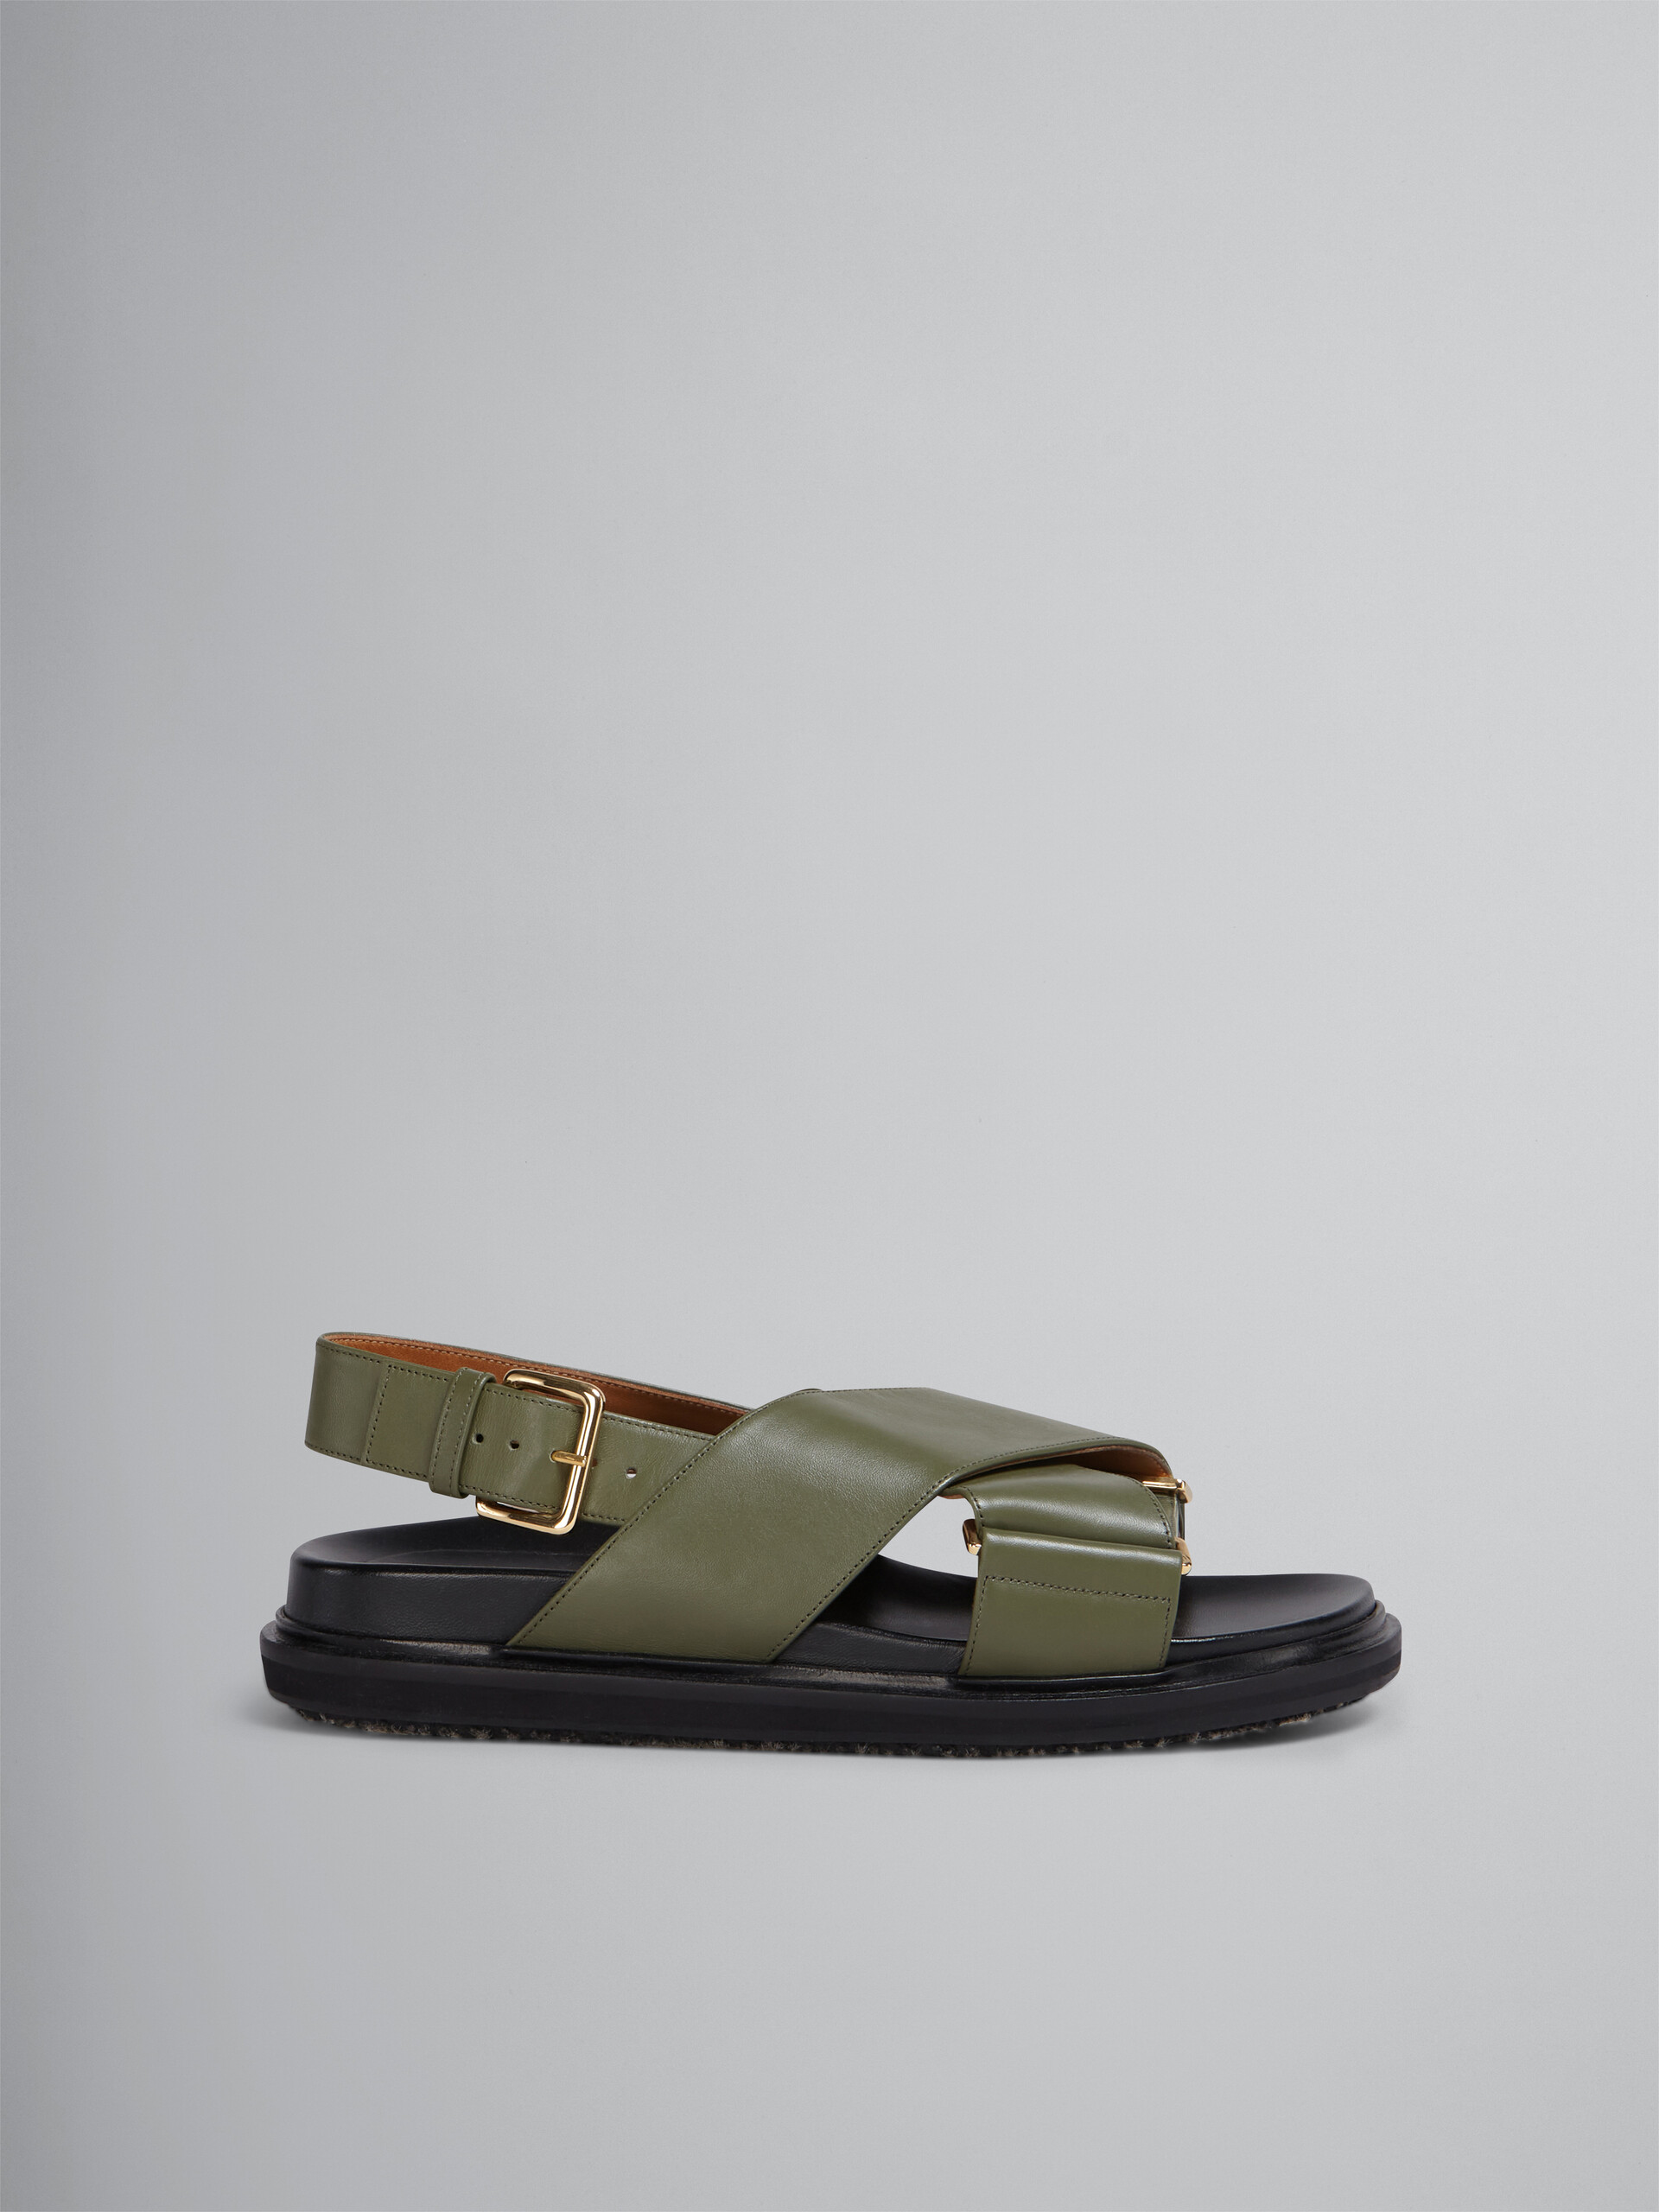 Green smooth calf leather fussbett - Sandals - Image 1